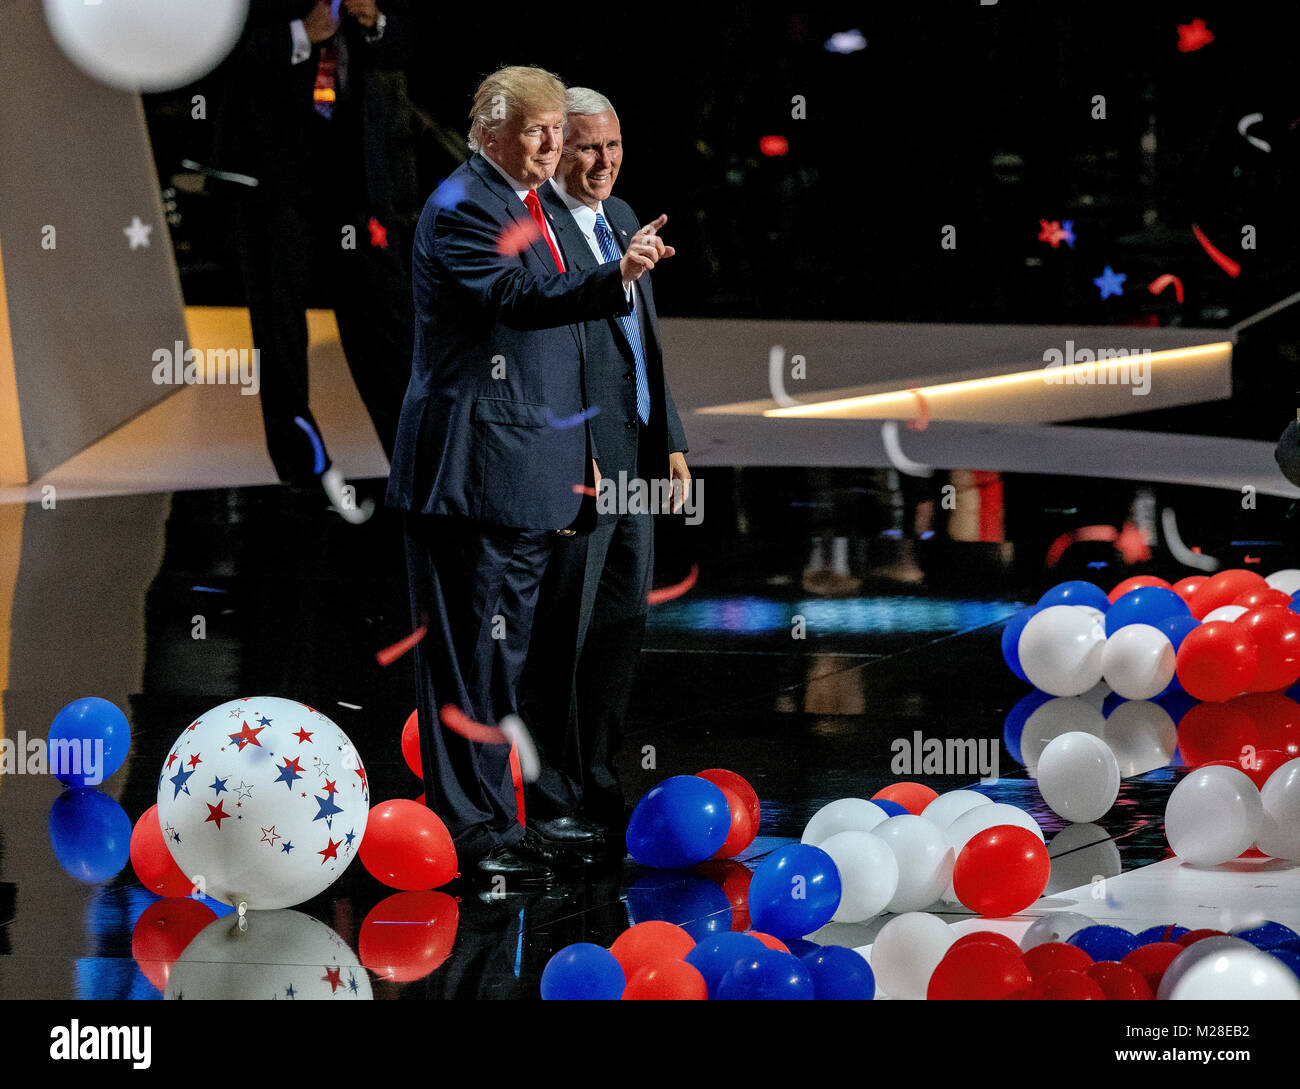 Cleveland, Ohio, USA, 21st, July, 2016 Republican candidates Donald Trump and  Mike Pence celebrate at the conclusion of the convention on stage at the Quicken Loans Arena, Stock Photo